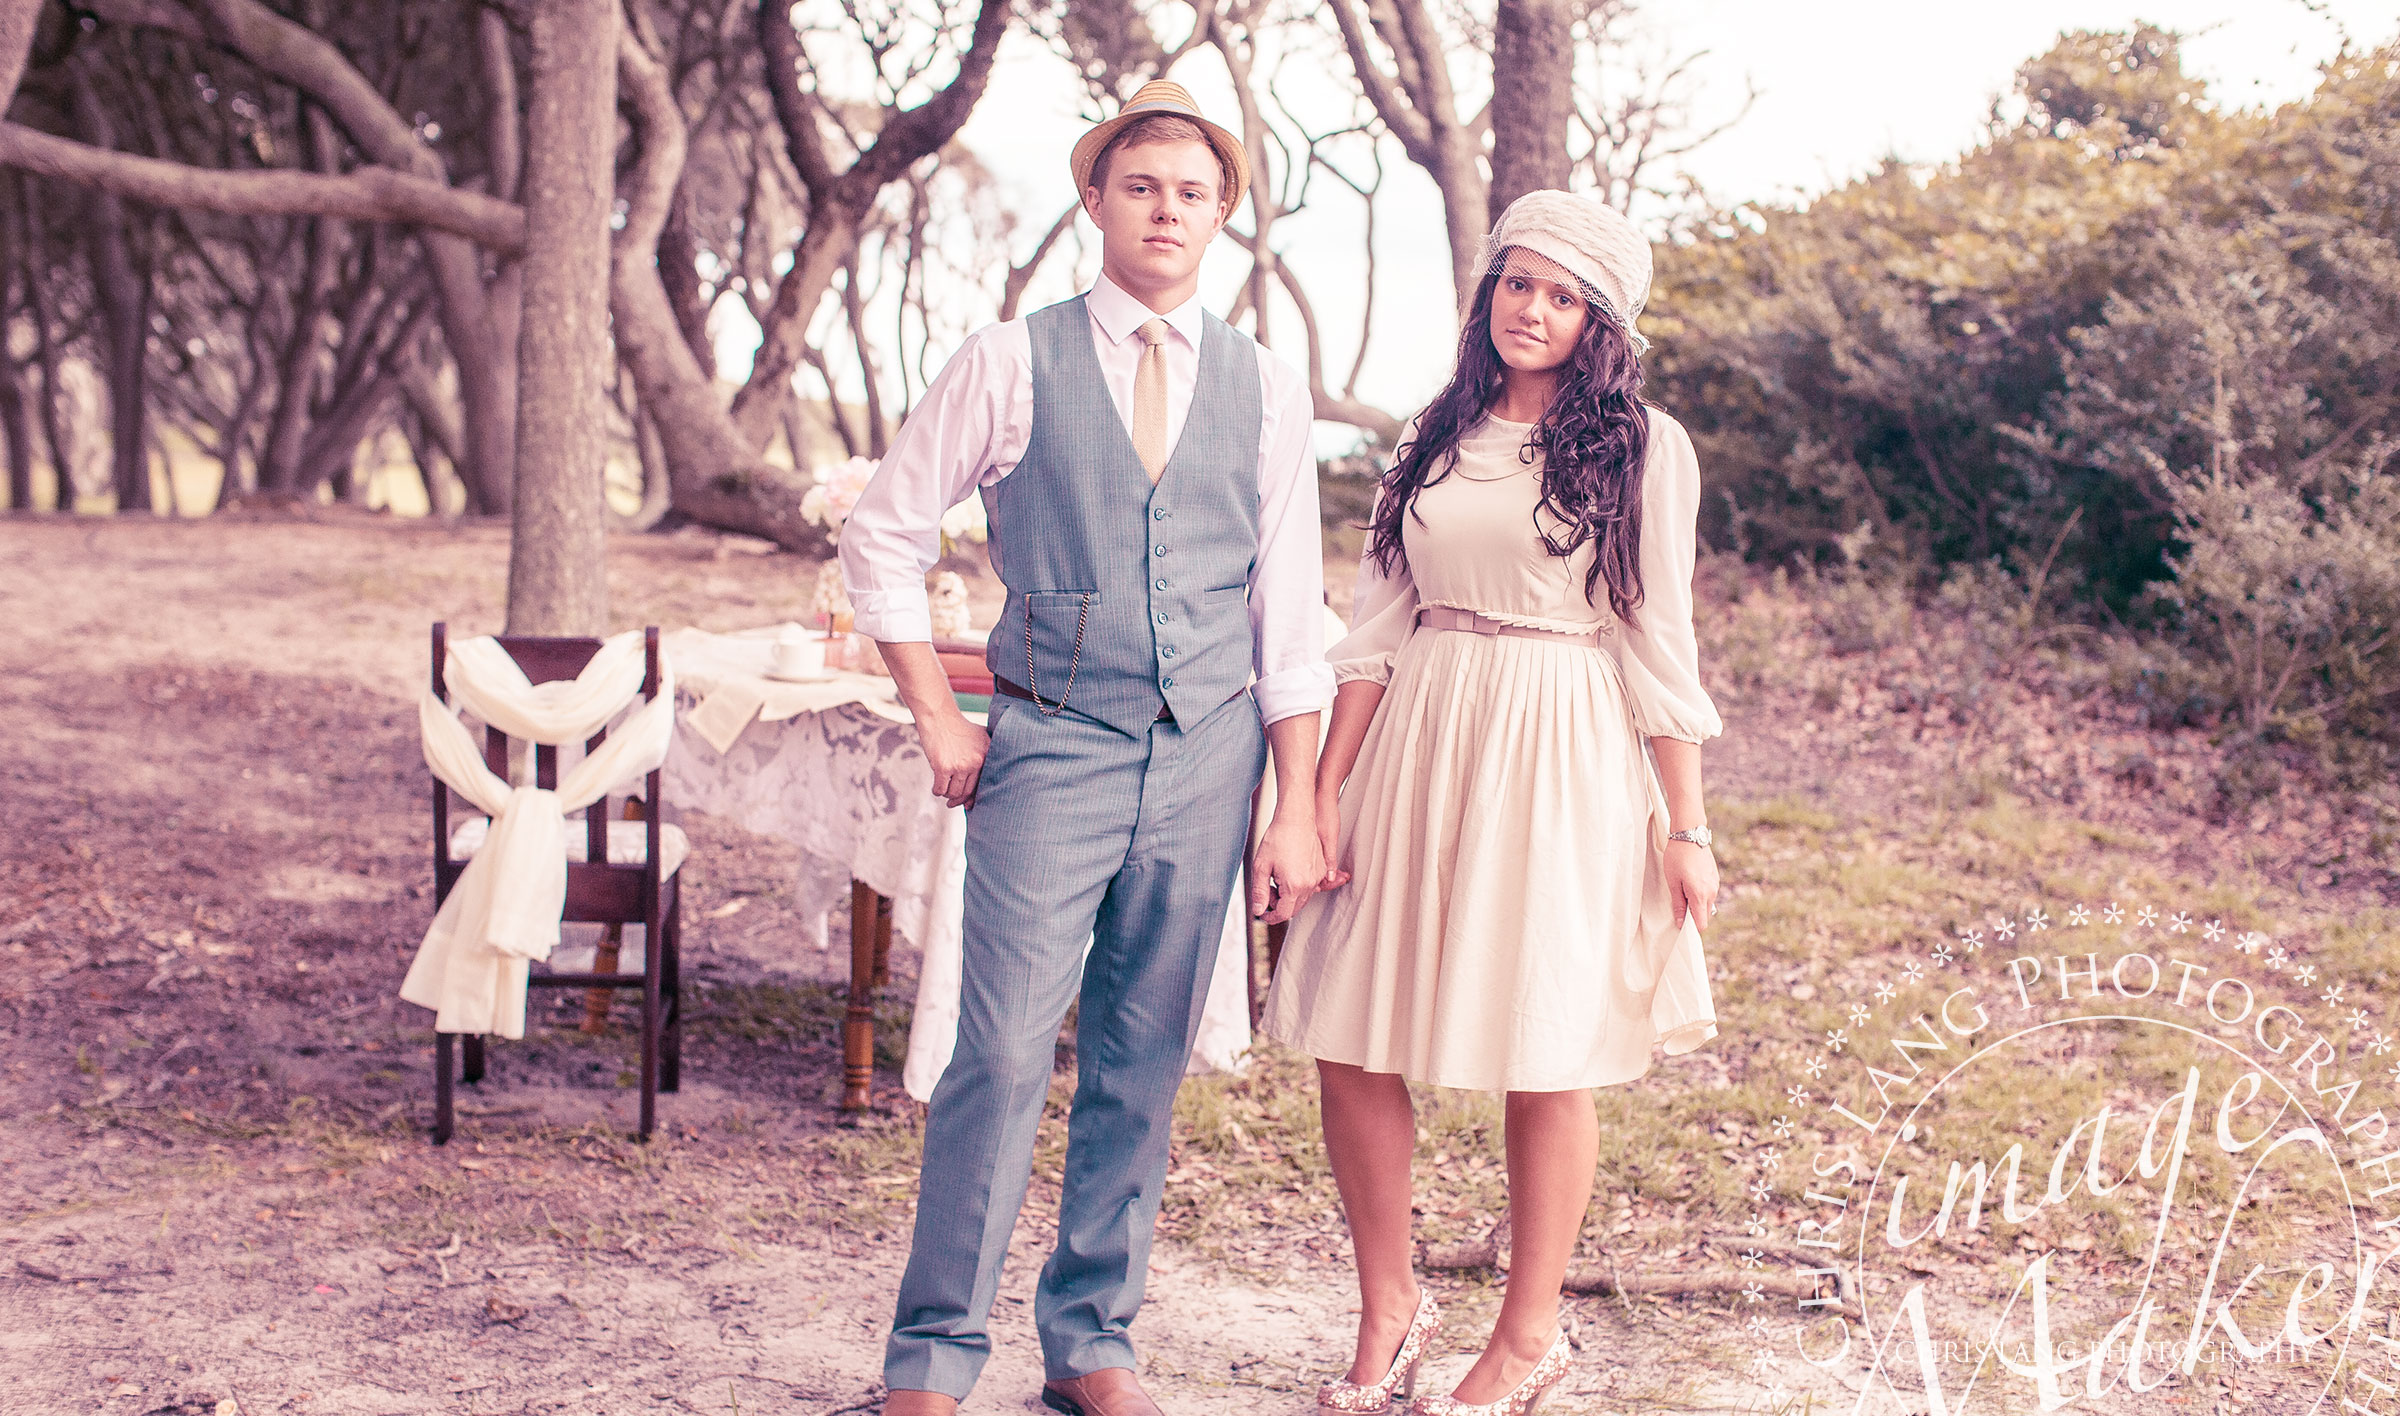 A vintage style engagment picture of a couple wearing retro attire. Engagment picture ideas and inspiration.